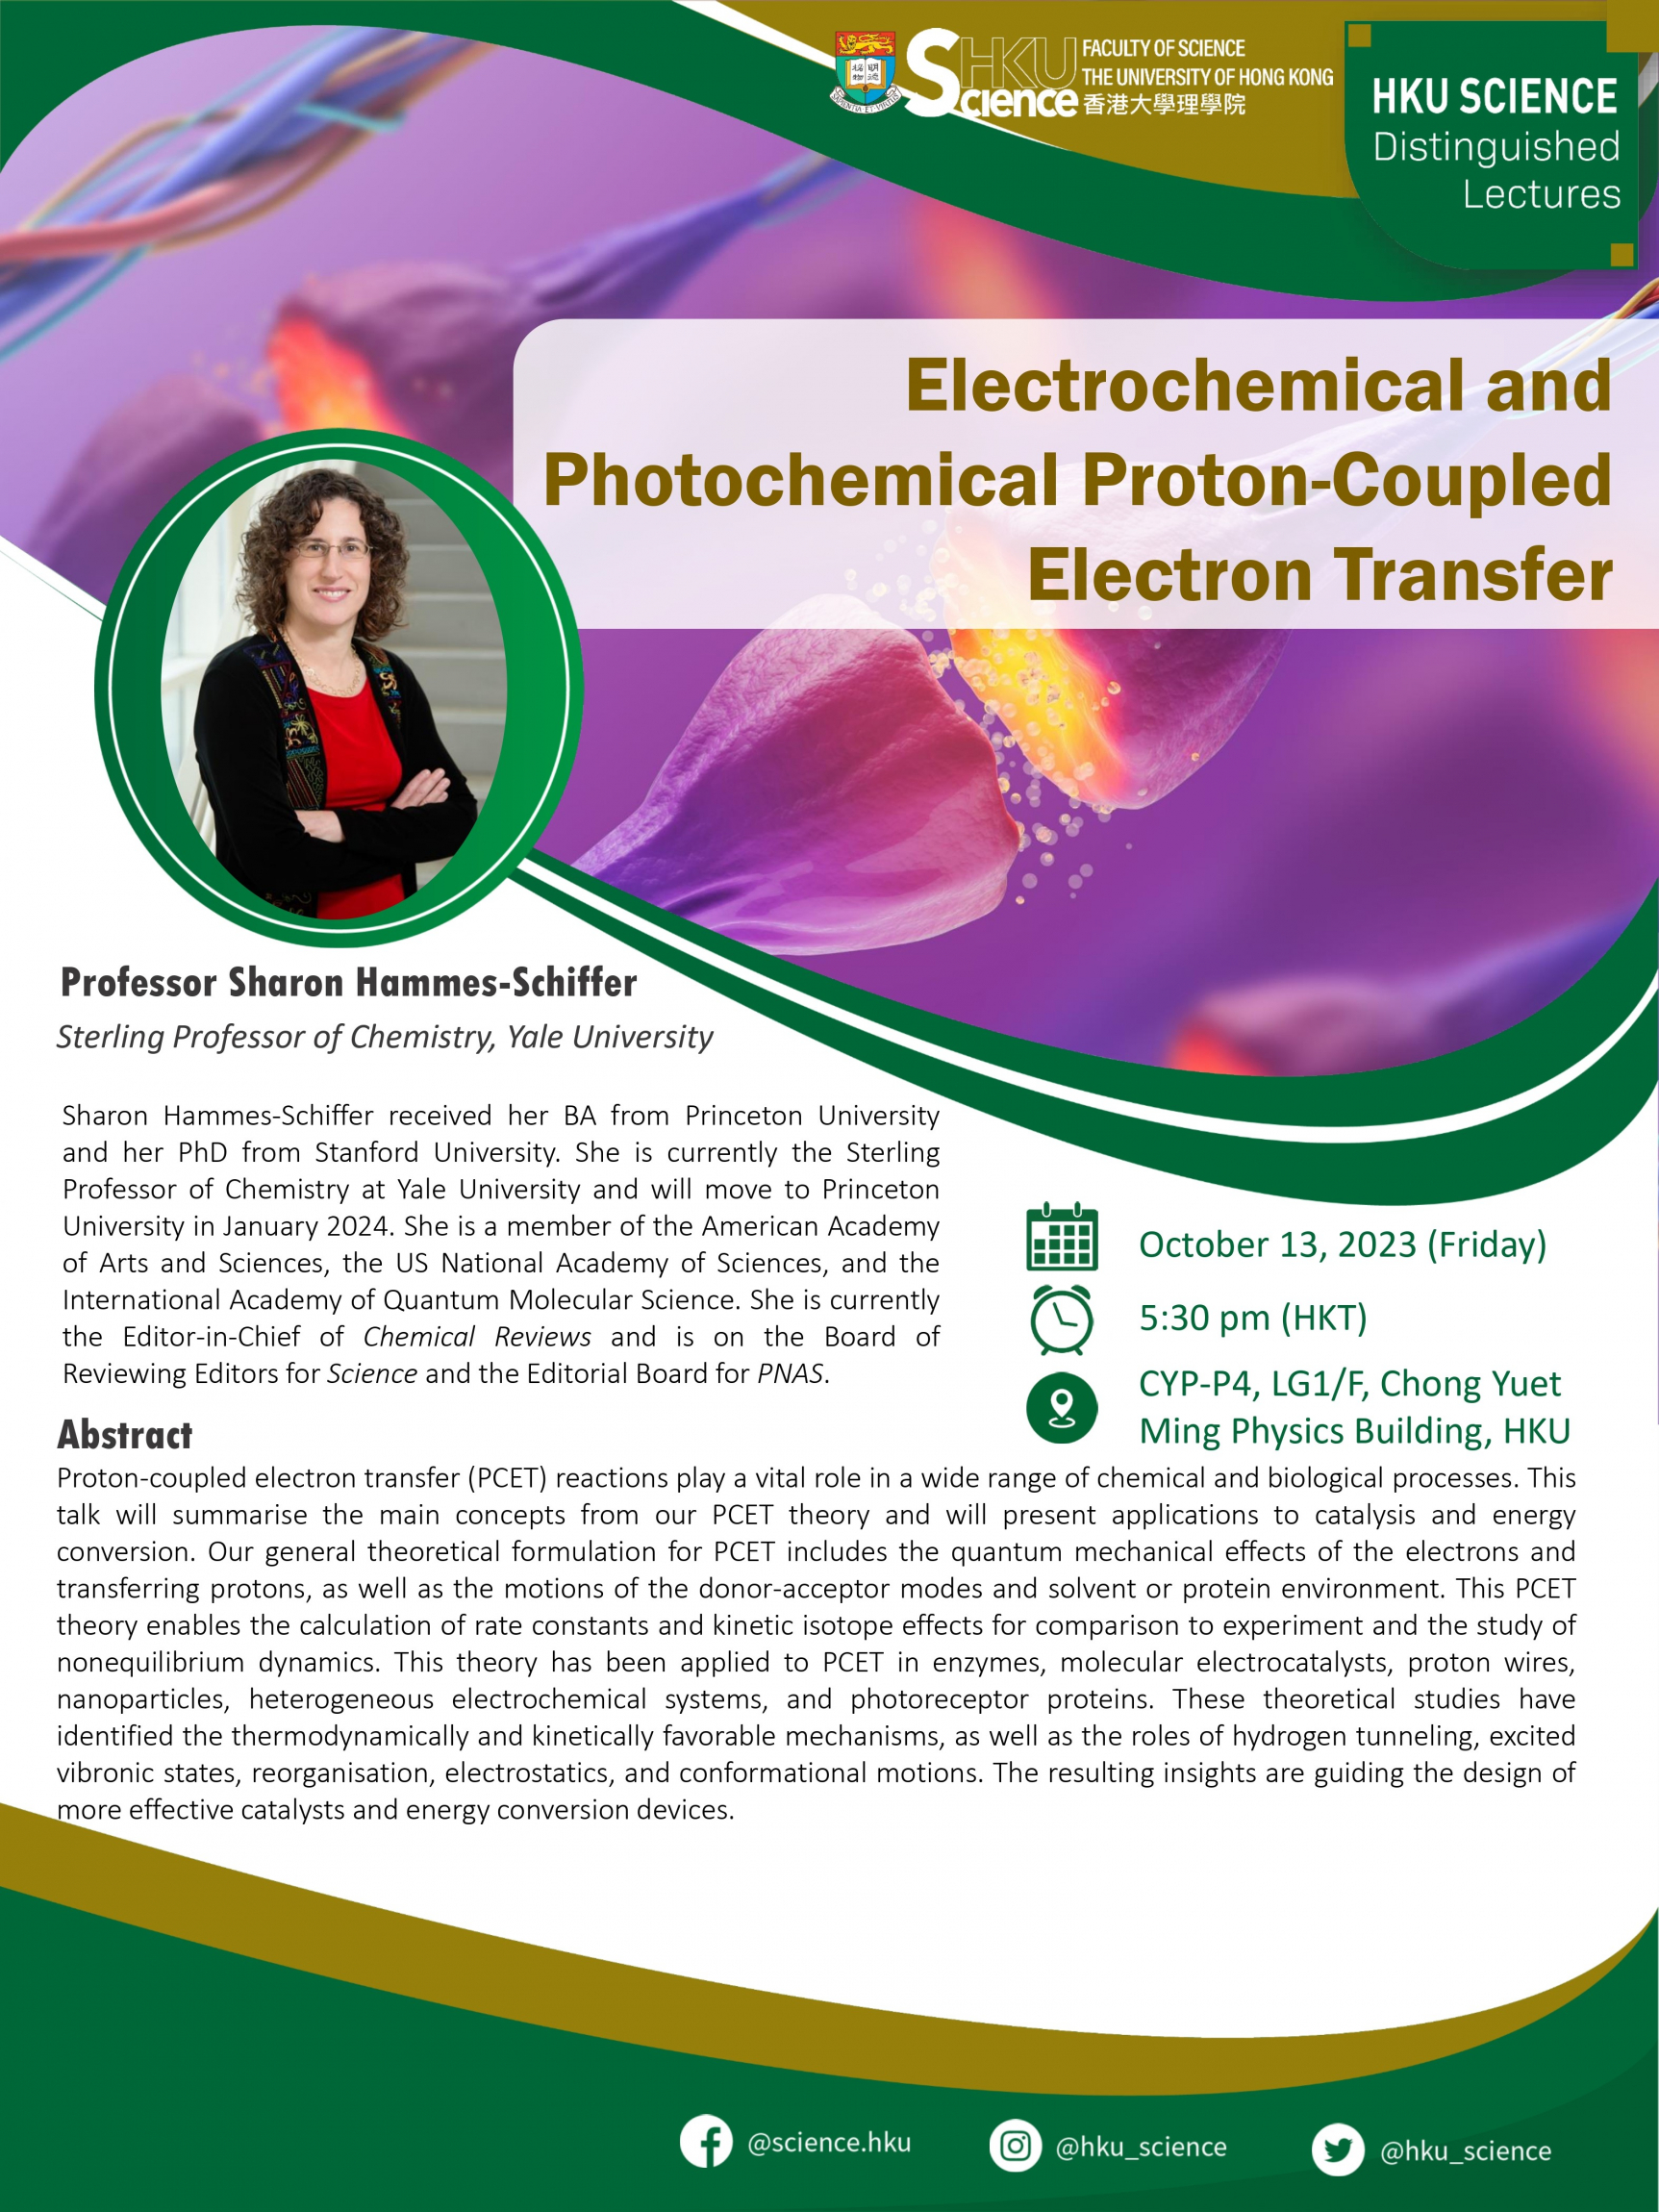 Self Photos / Files - Electrochemical and Photochemical Proton-Coupled Electron Transfer